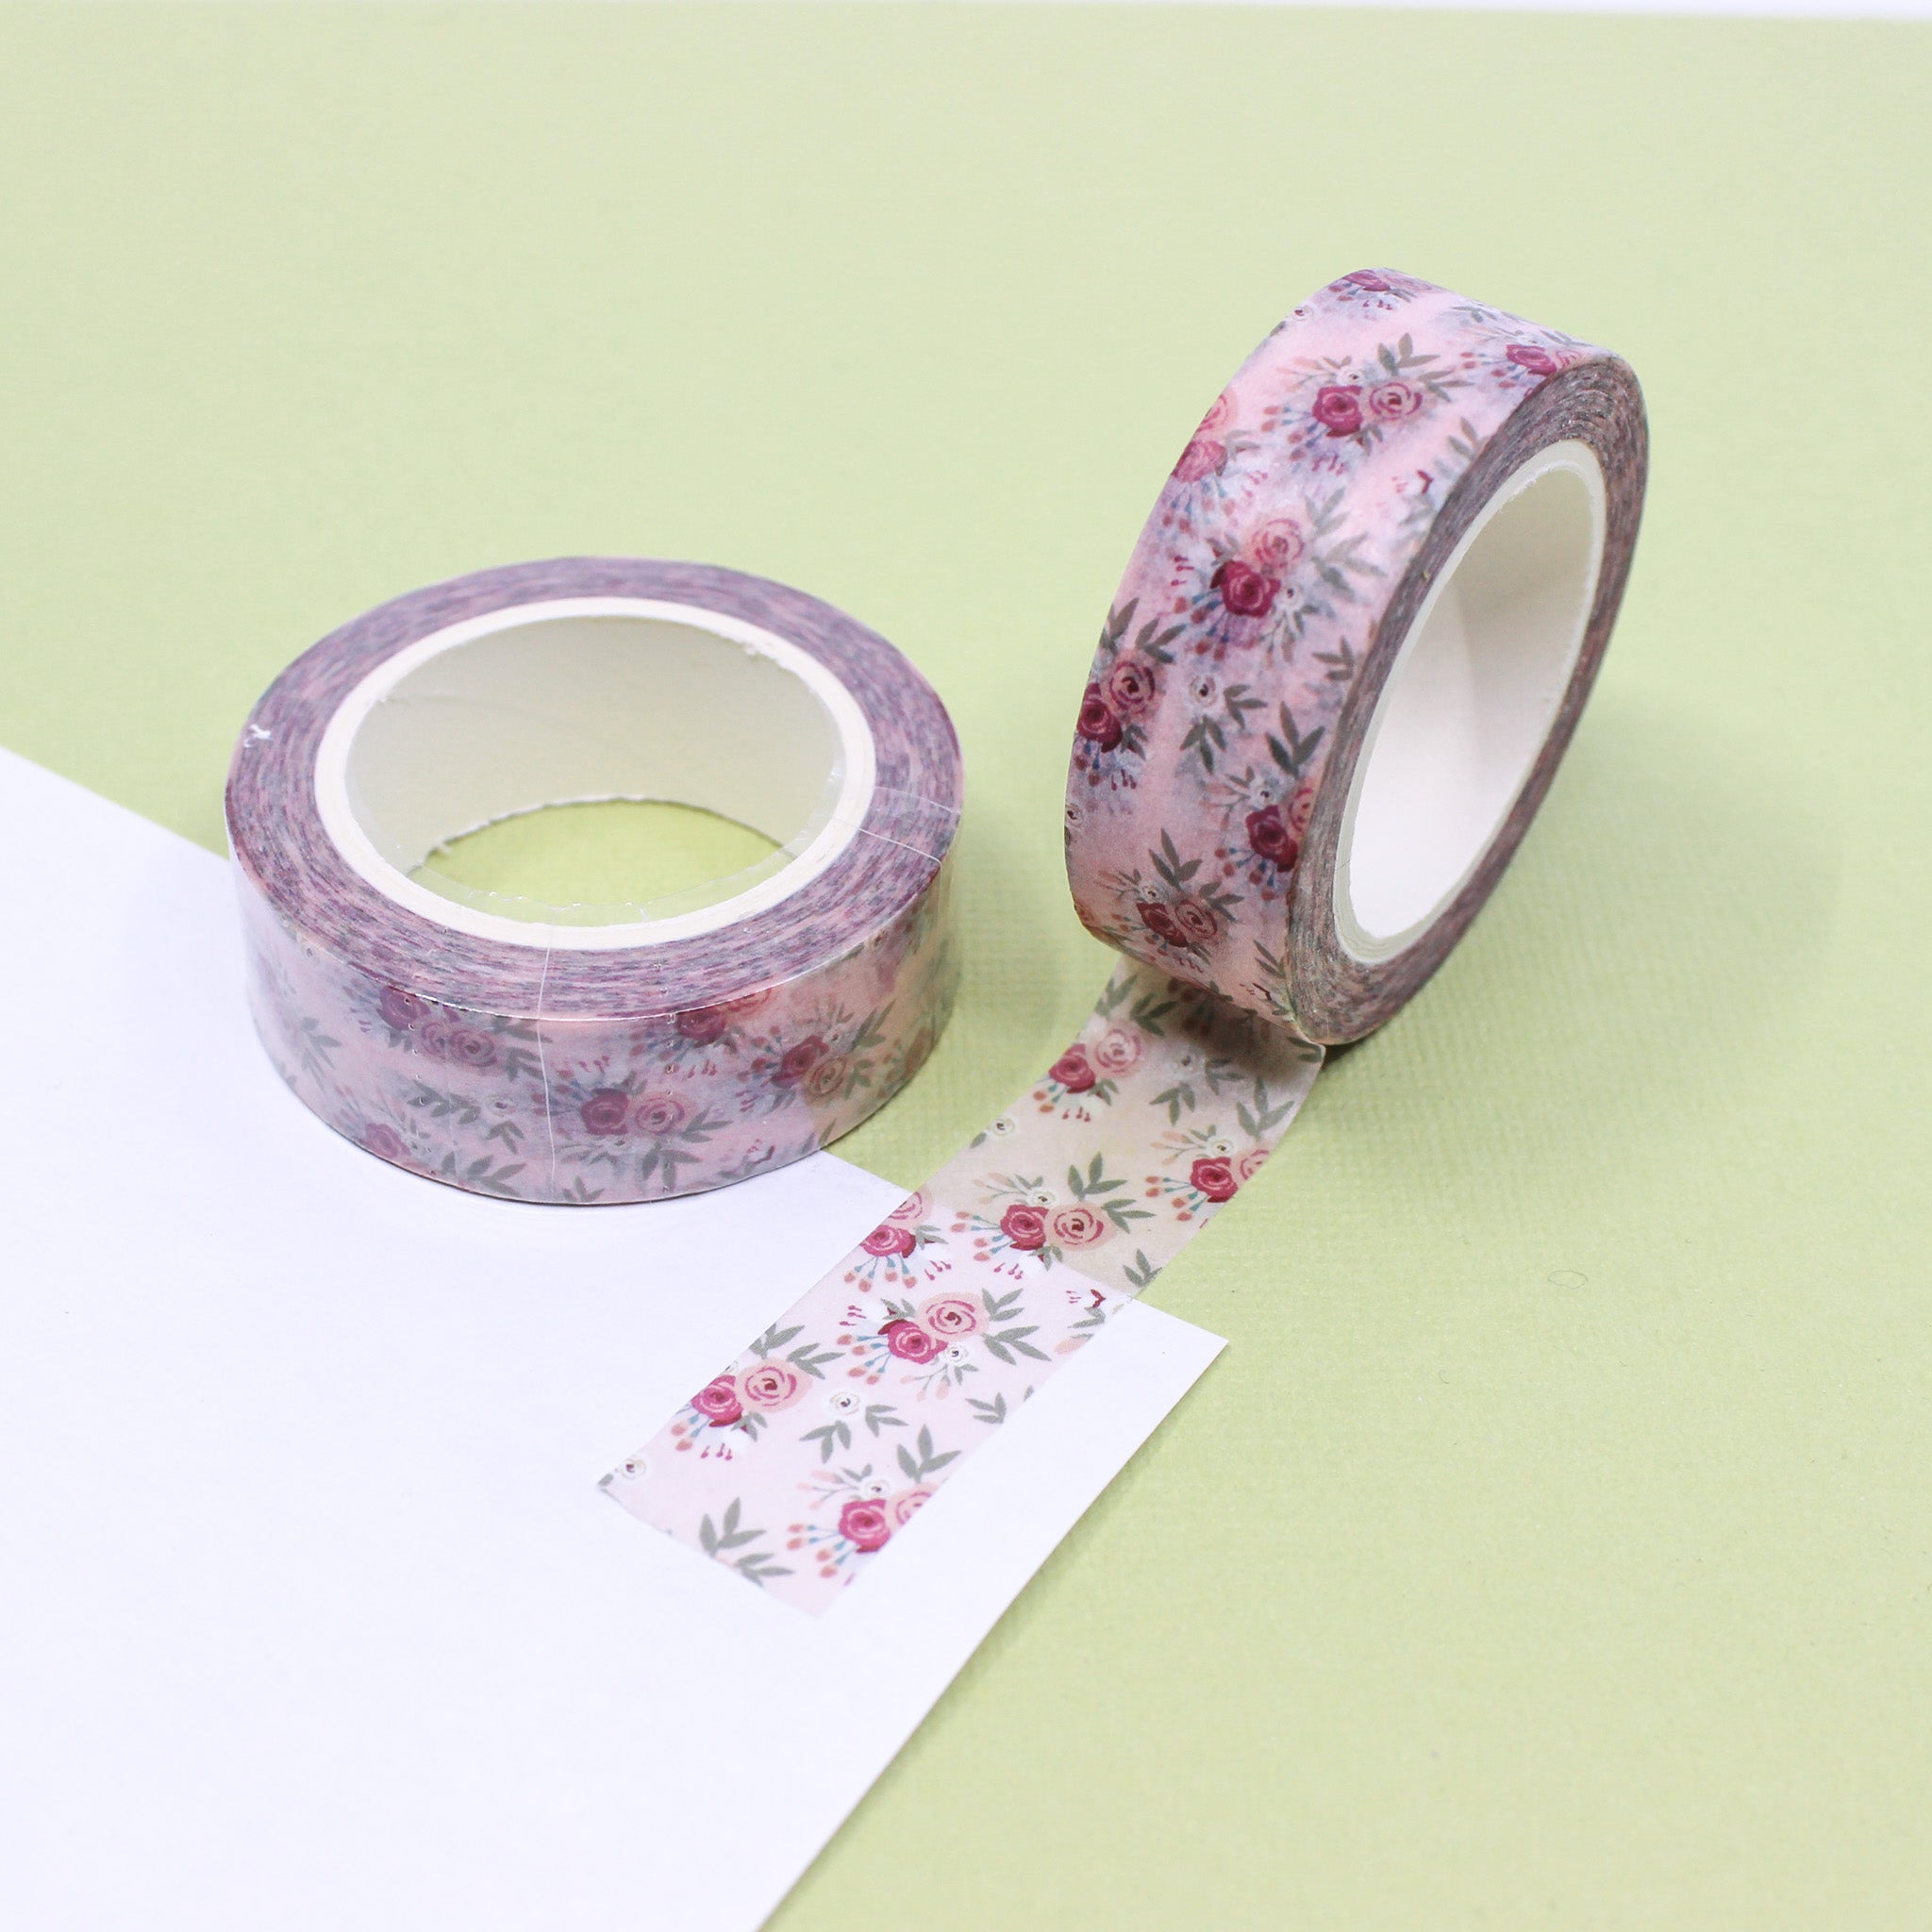 This a pink vintage rose florals pattern washi tape from BBB Supplies Craft Shop